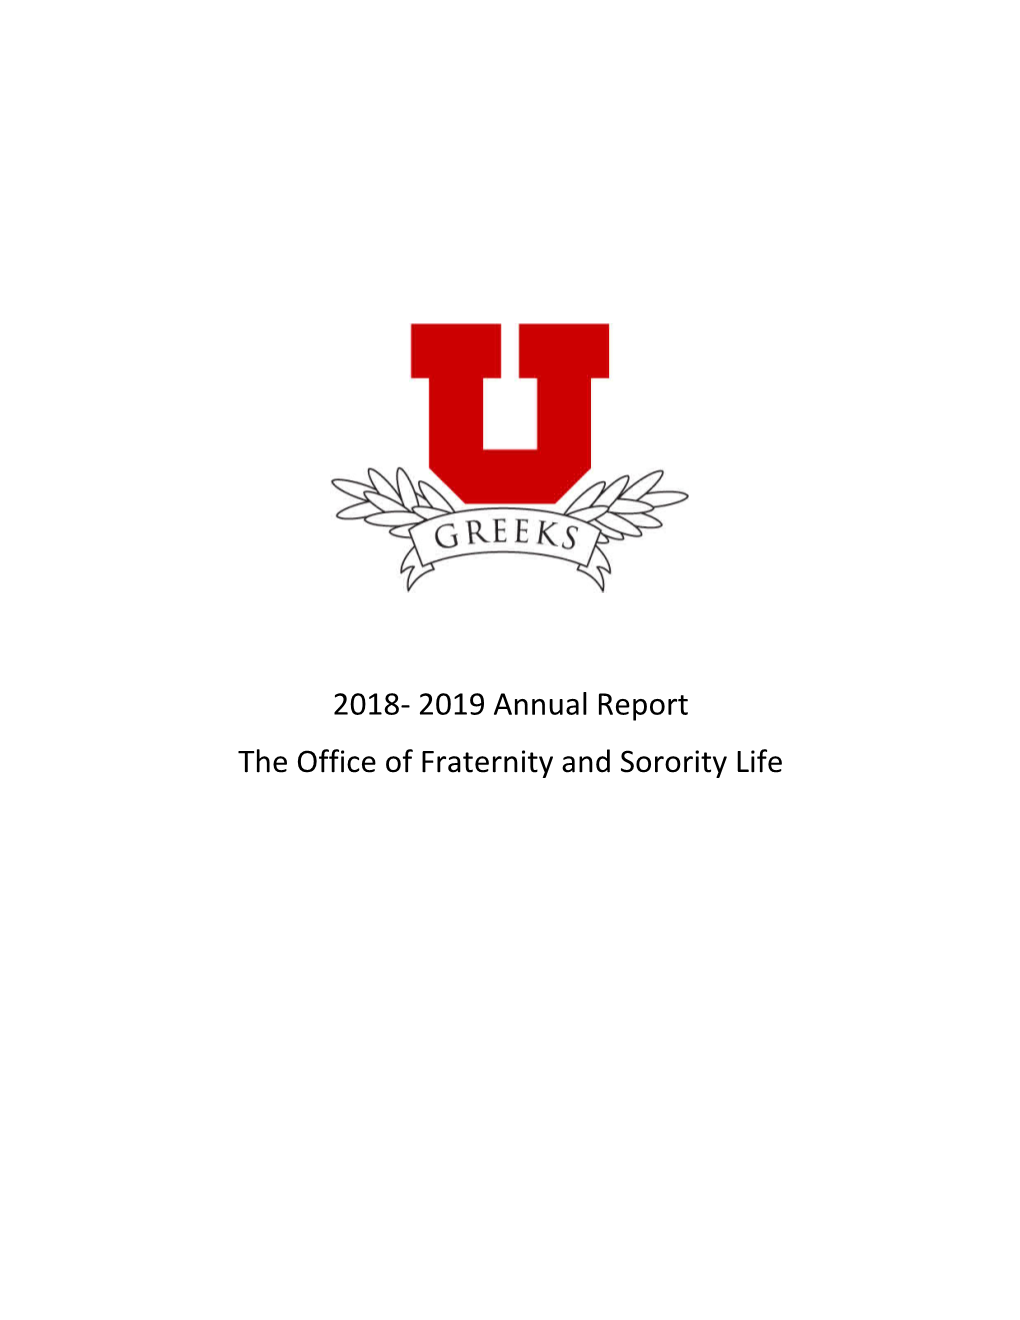 2018- 2019 Annual Report the Office of Fraternity and Sorority Life